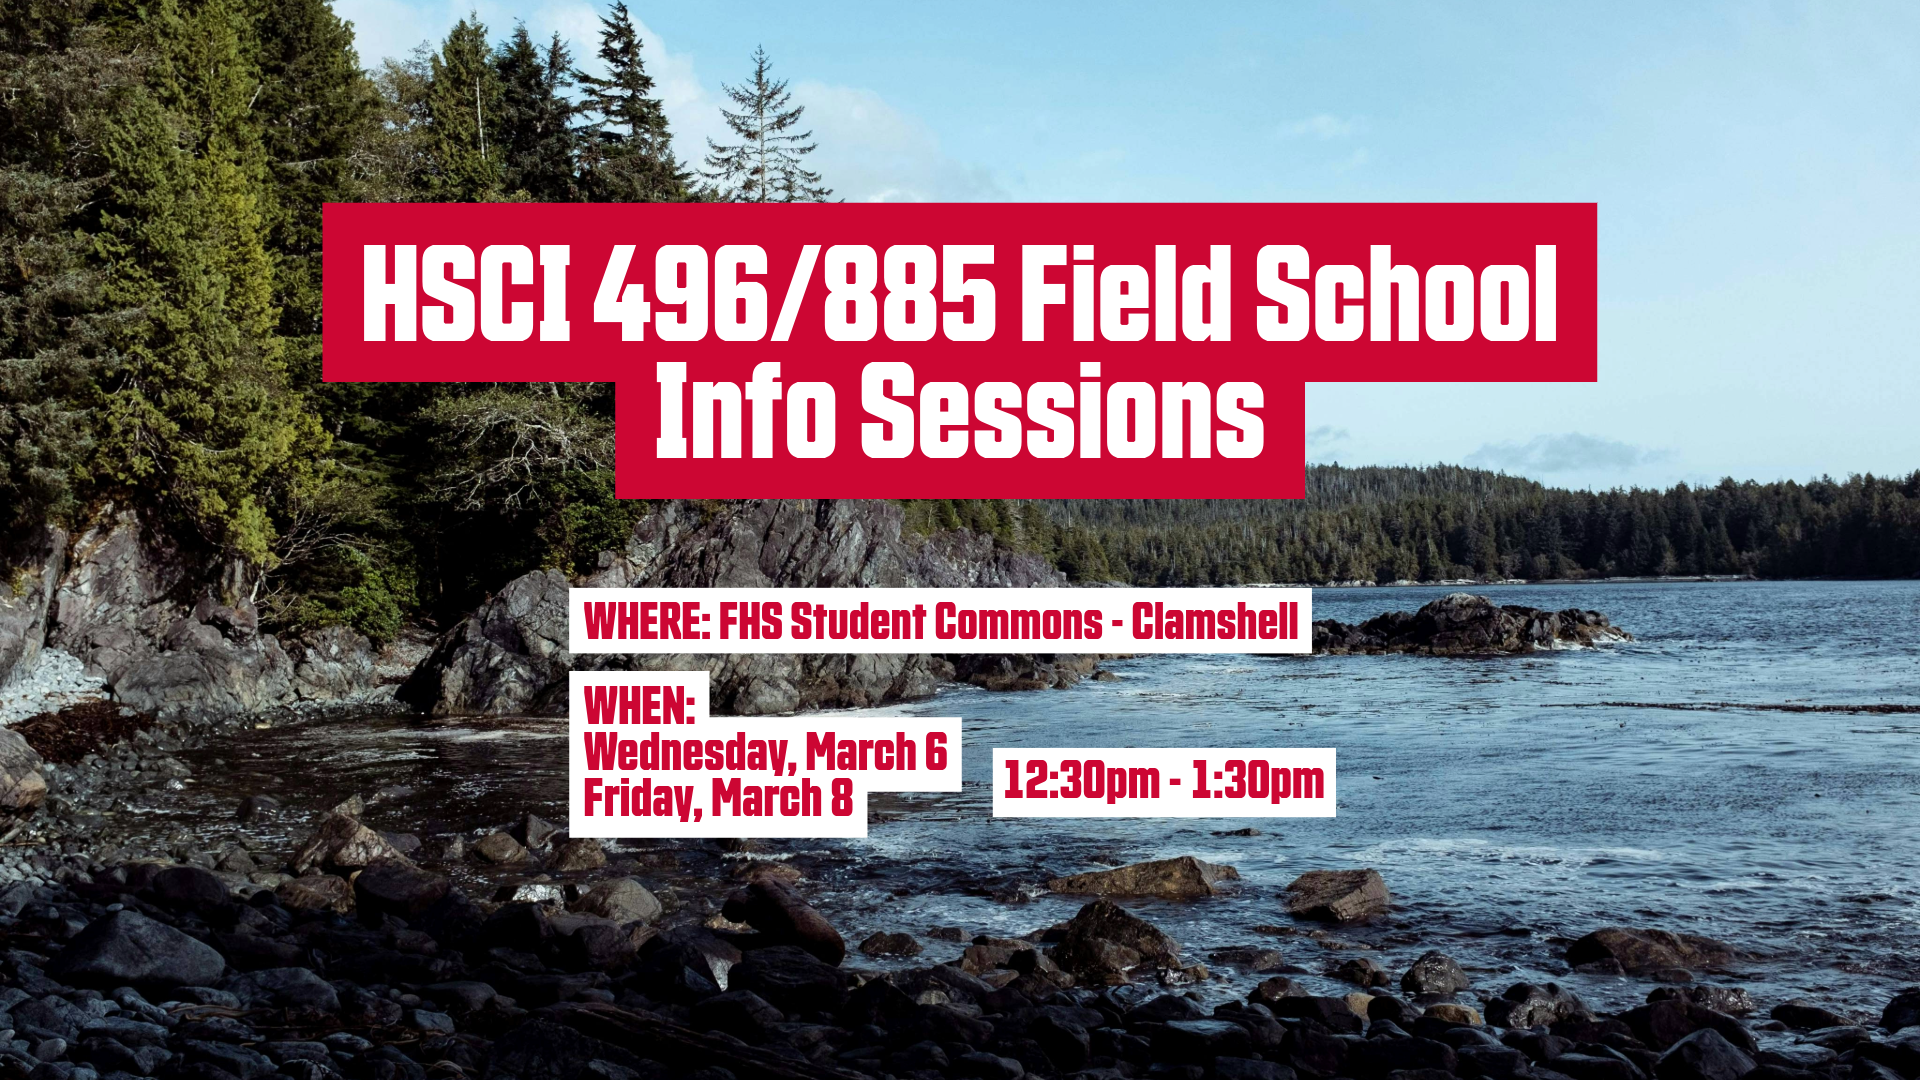 March 6 and 8: Field School Info Sessions